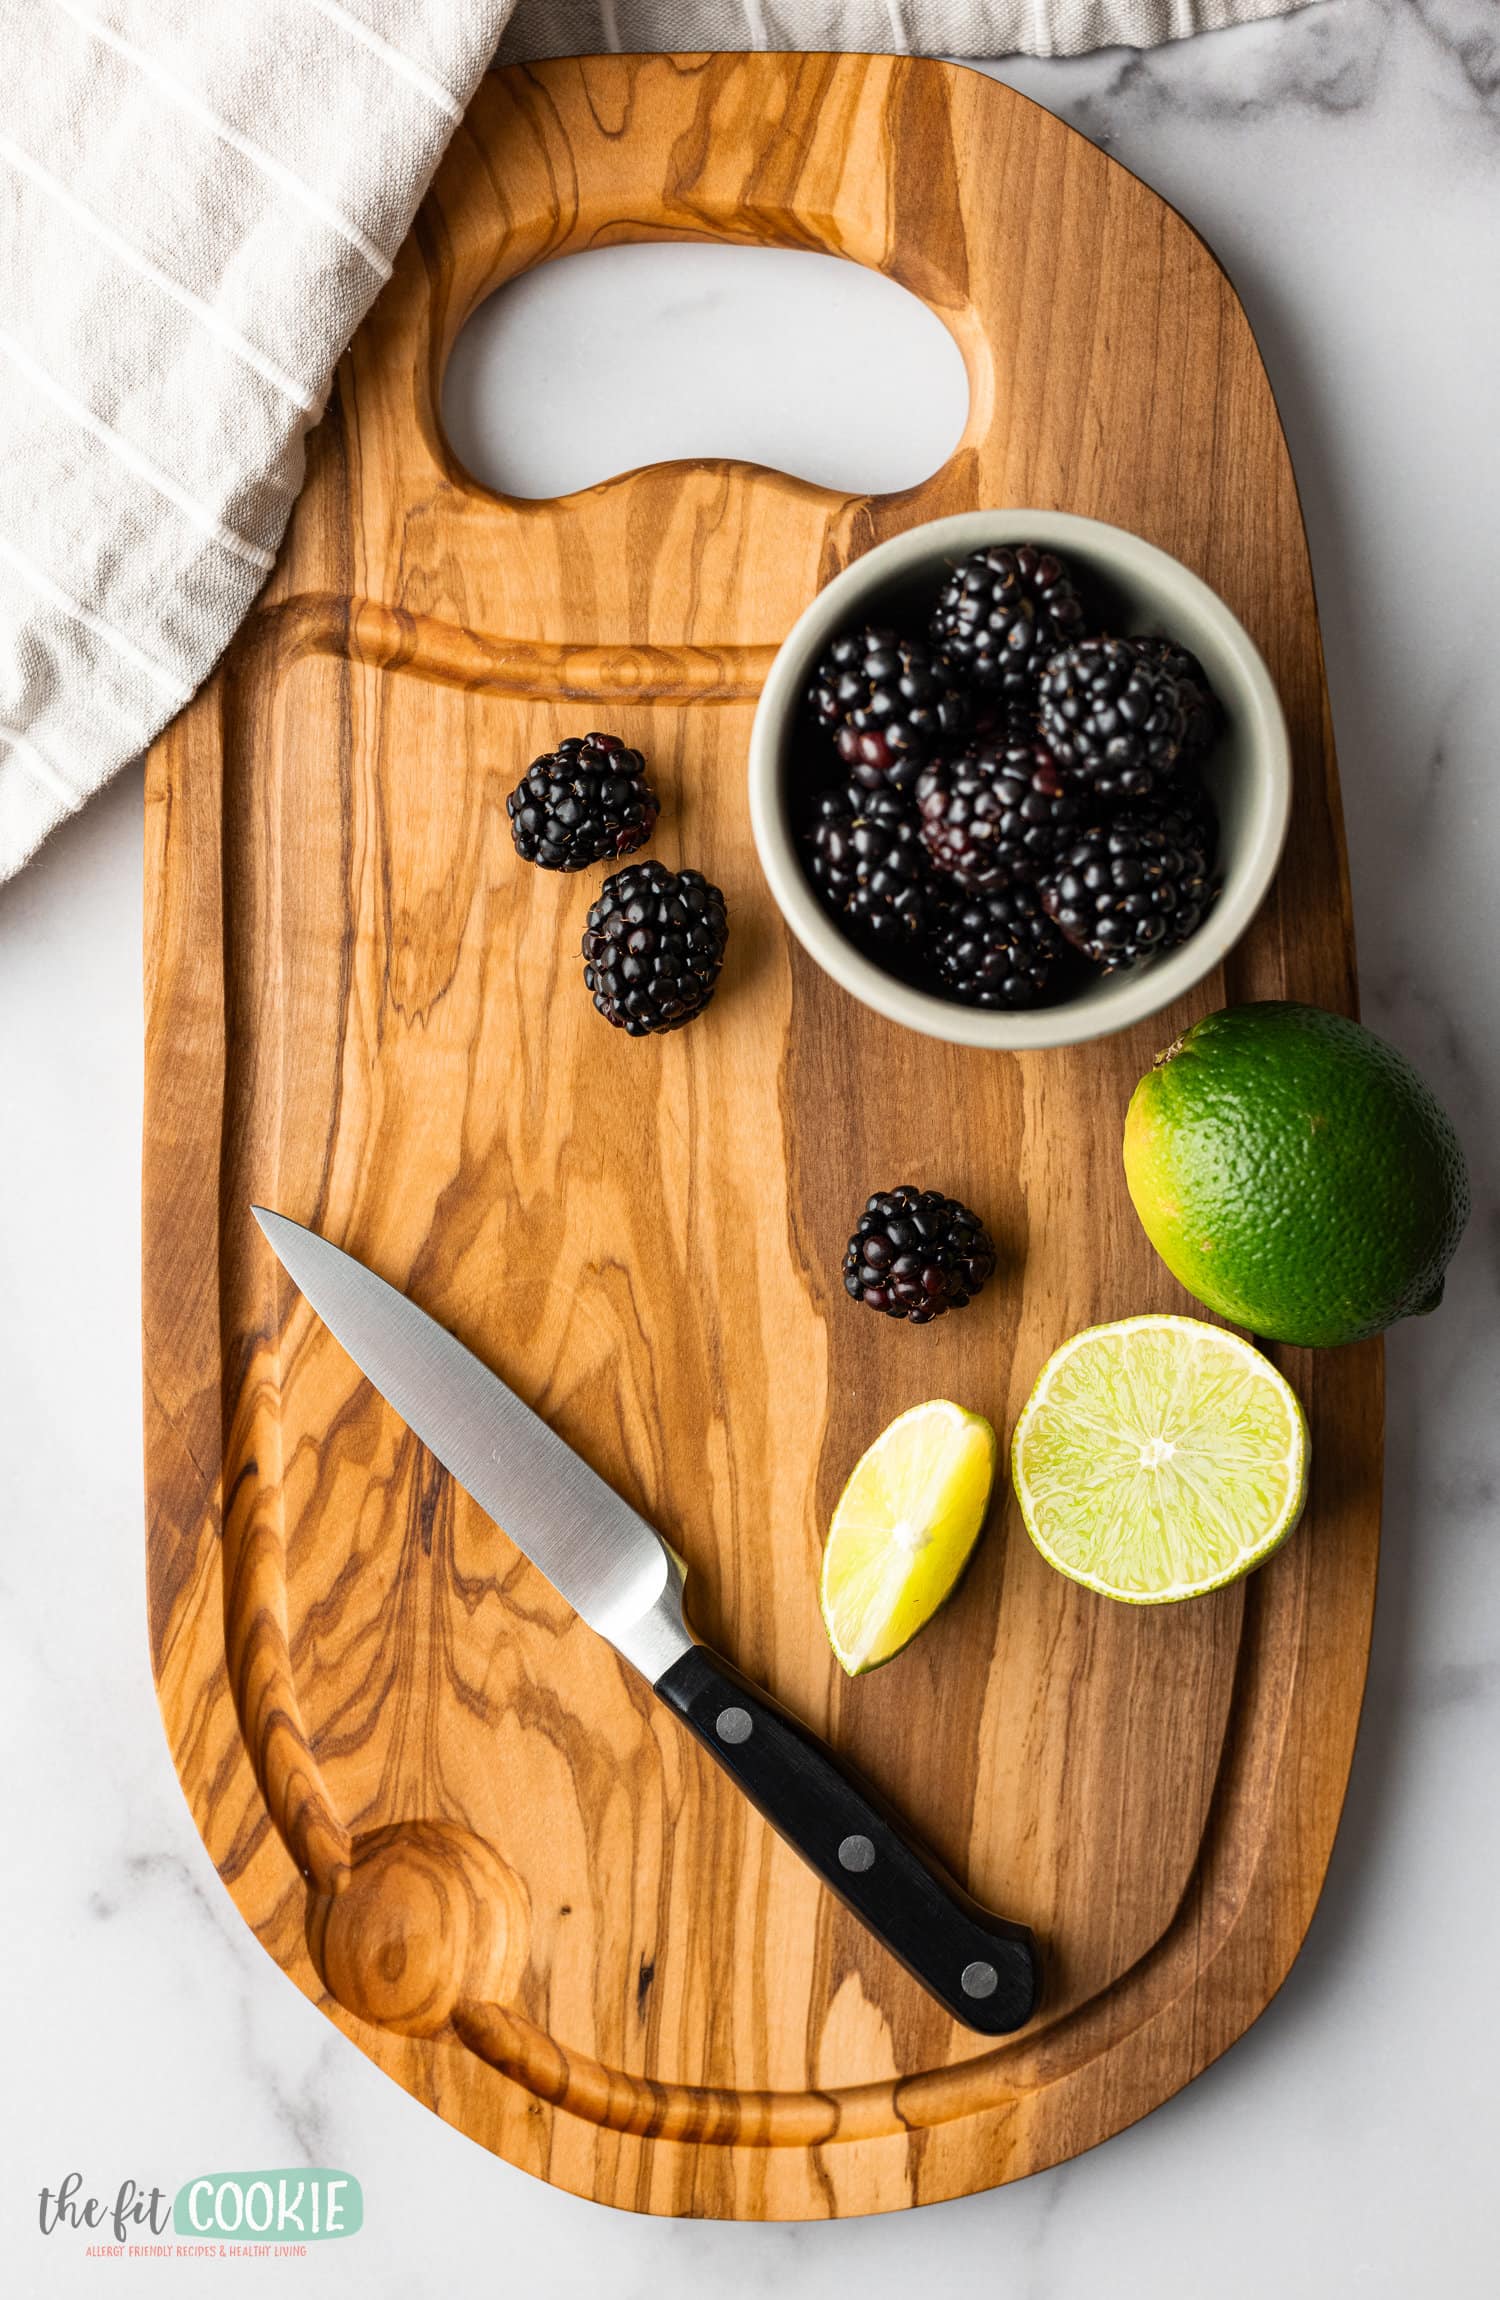 An olive wood cutting board with blackberries, limes, and a knife.